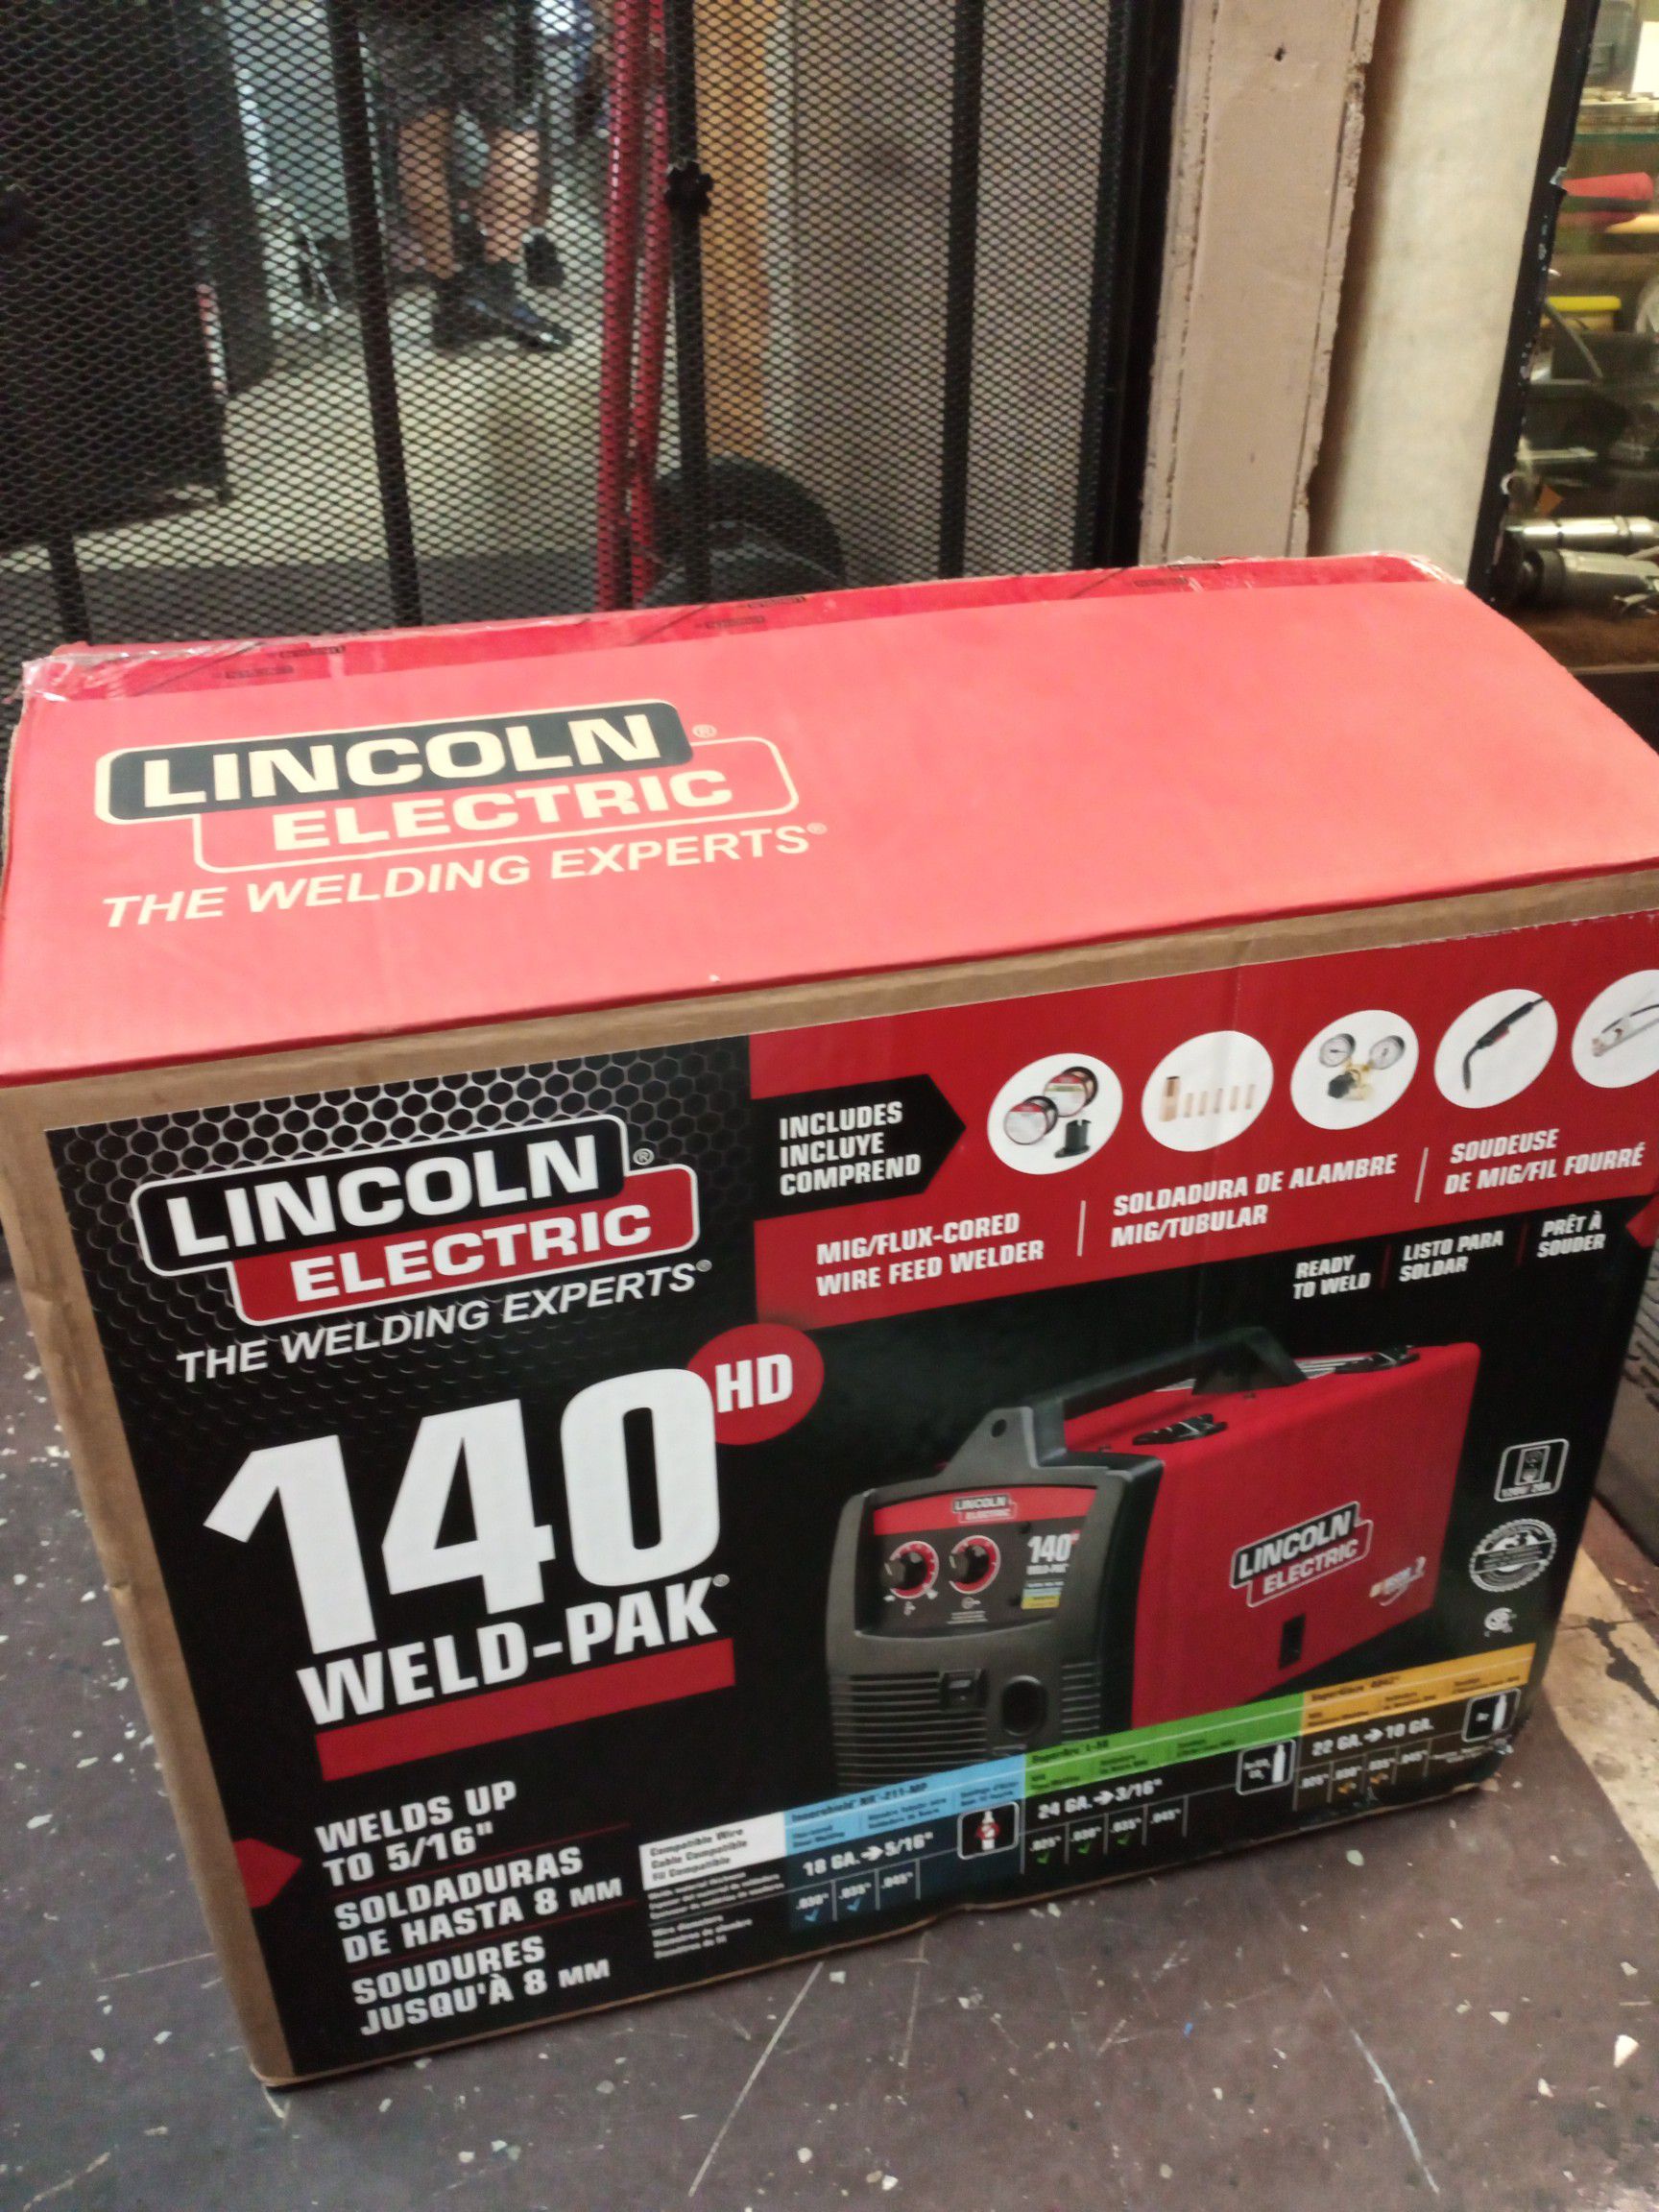 Lincoln Electric 140 Amp Weld Pak 140 HD MIG Wire Feed Welder with Magnum 100L Gun, Sample spools of MIG Wire and Flux Wire, 115V